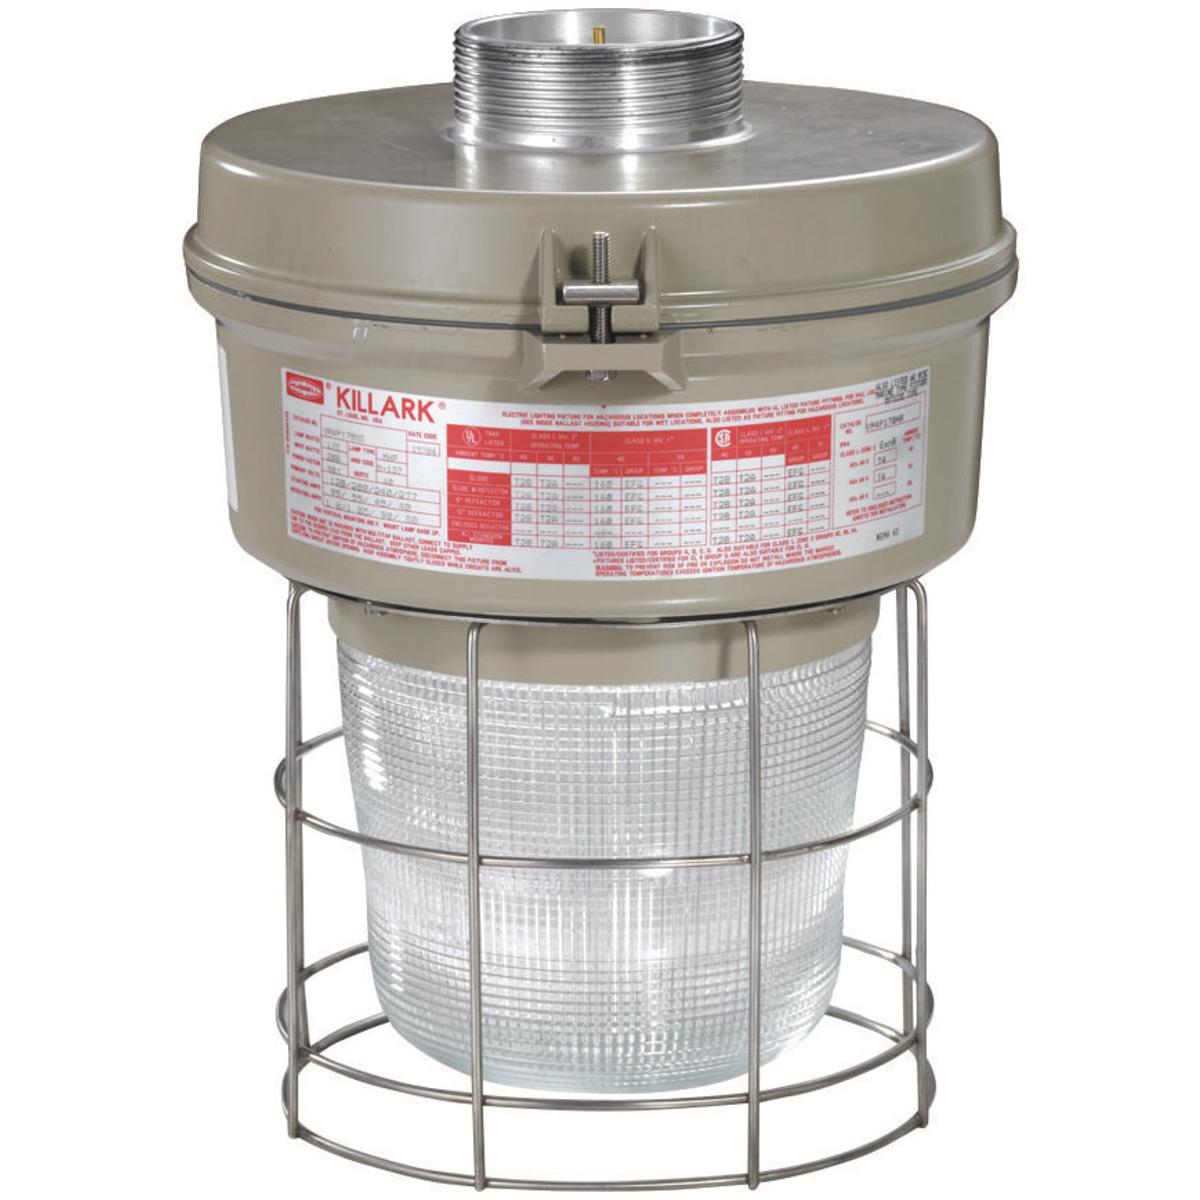 Hubbell VM4P170EZR1G VM4 Series - 175W Metal Halide Quadri-Volt - EZ Mount Adapter - Type I Glass Refractor and Guard  ; Ballast tank and splice box – corrosion resistant copper-free aluminum alloy with baked powder epoxy/polyester finish, electrostatically applied for comple